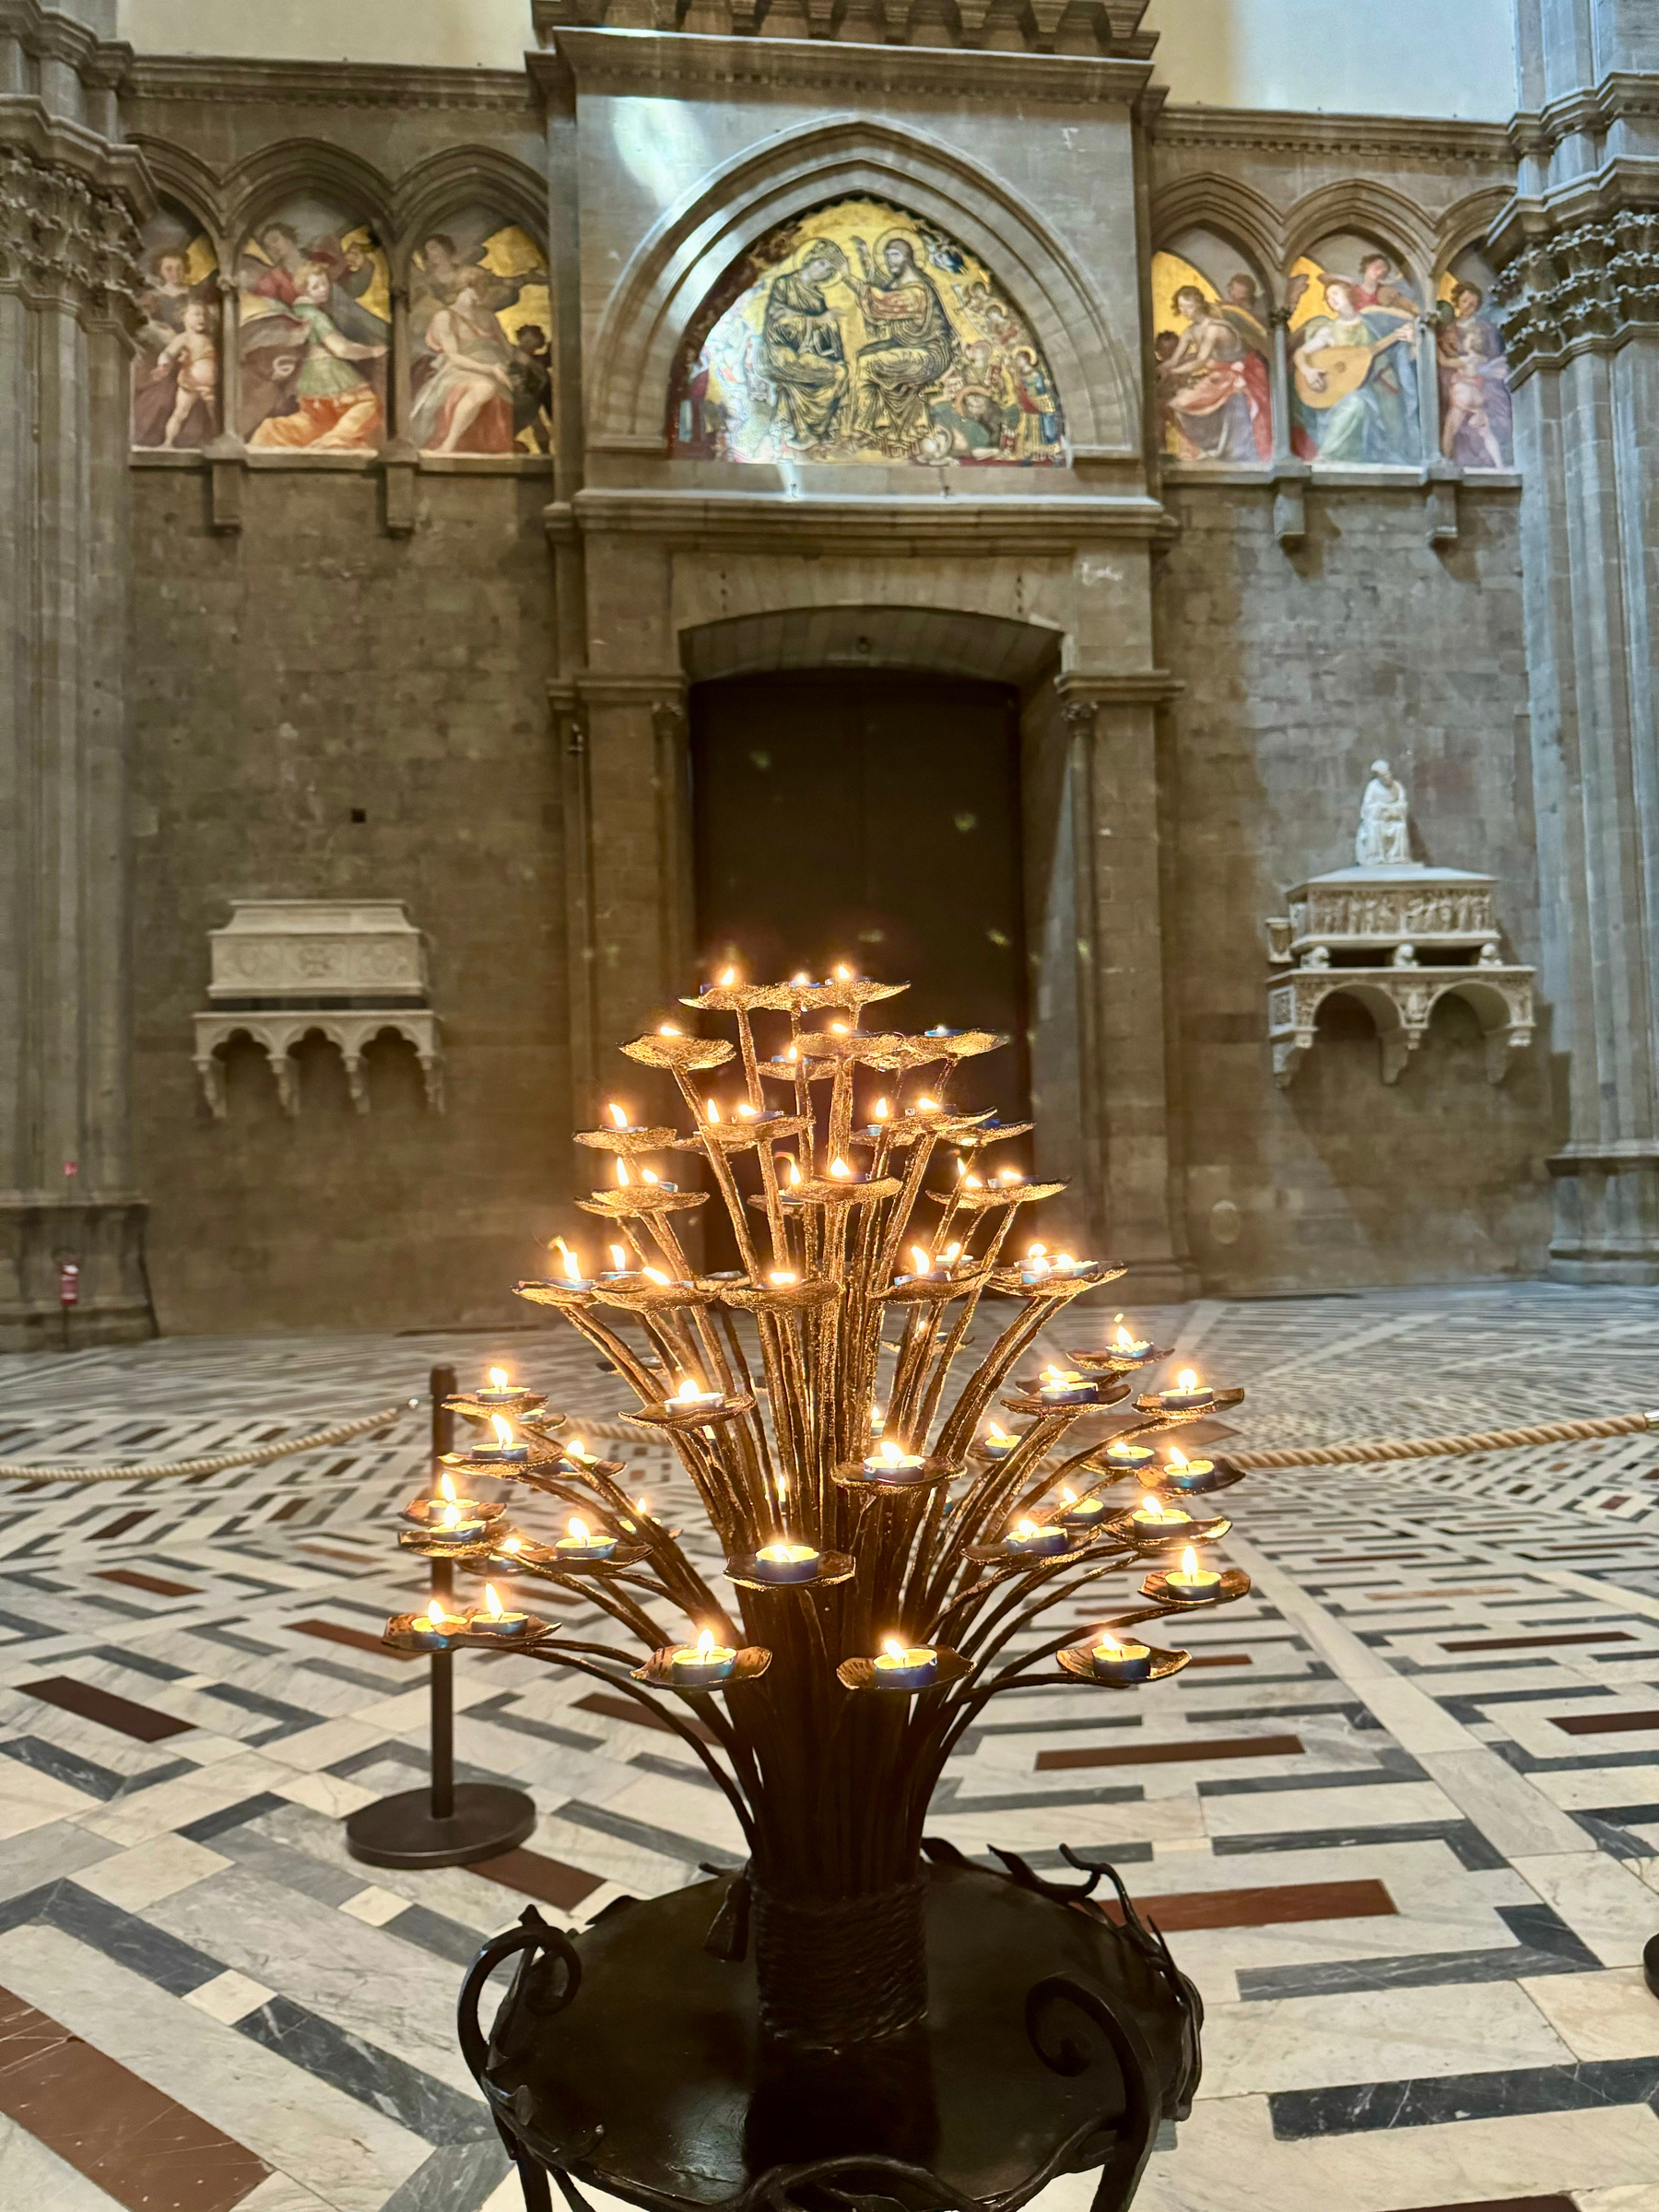 An ornate candle stand with multiple lit candles in a cathedral. The background features a large, arched doorway with a mosaic of religious figures above it, flanked by stone columns and additional wall decorations, including painted frescos and statues. 